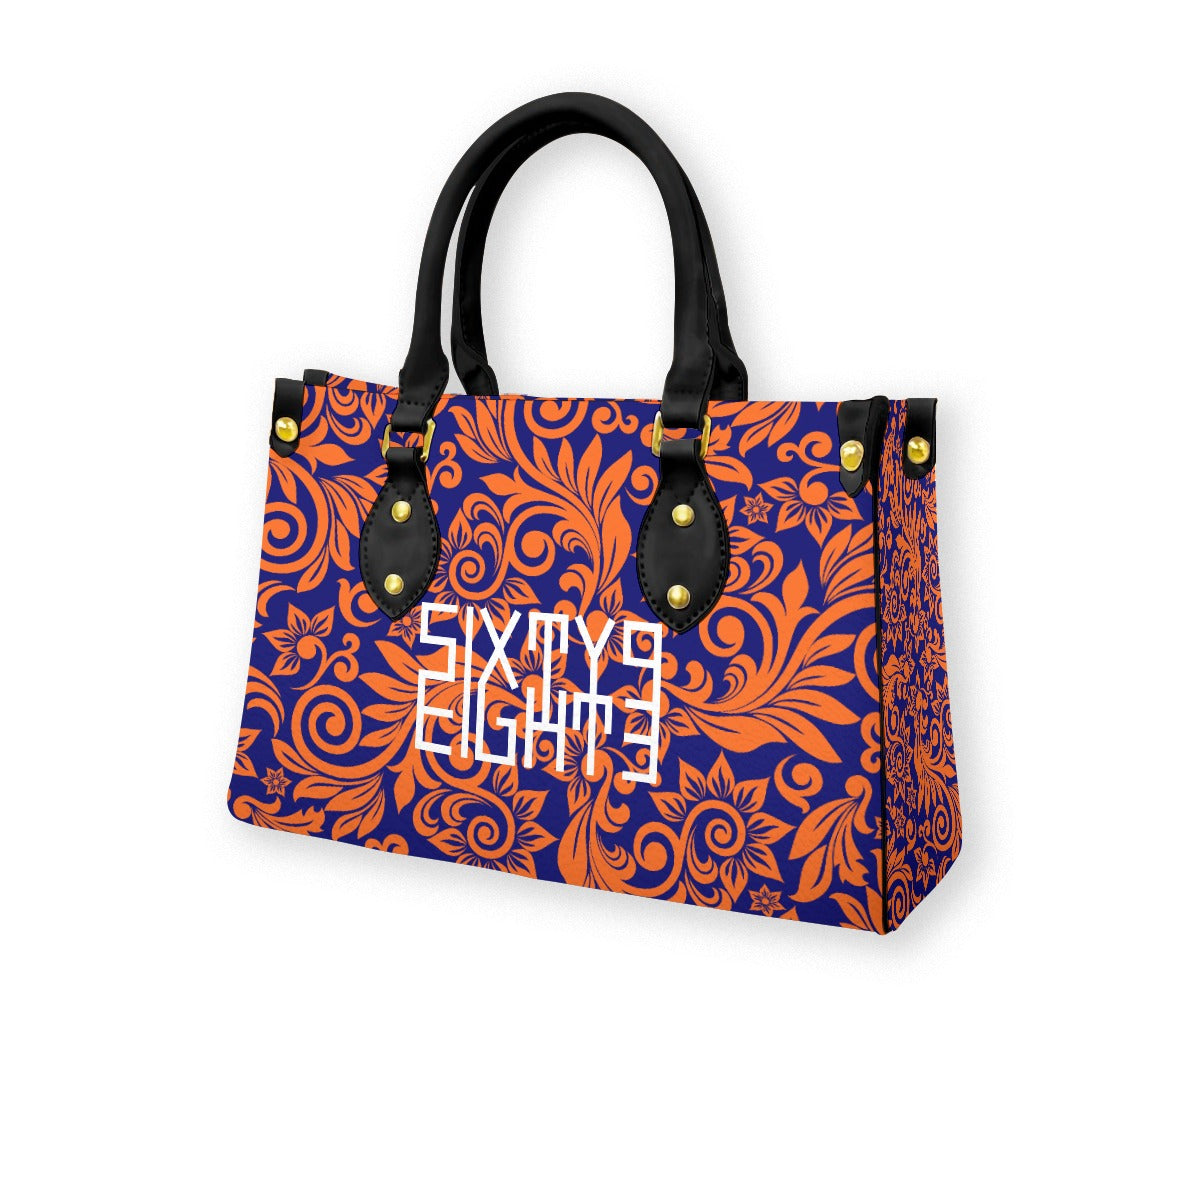 Sixty Eight 93 Logo White Women's Tote Bag With Black Handle #21